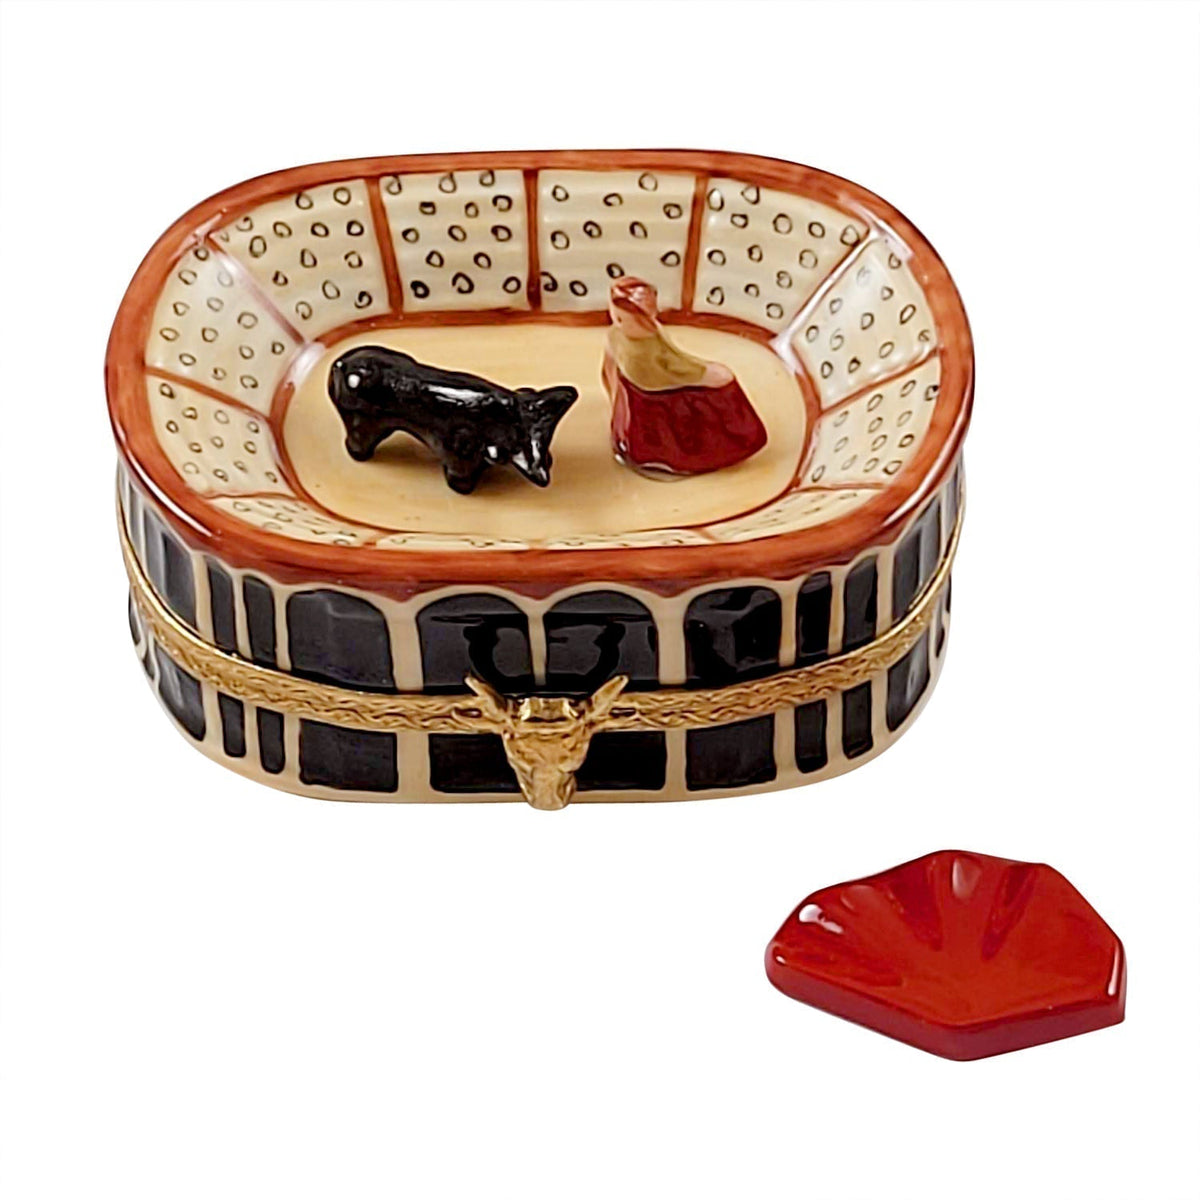 Bullfighting arena with removable red cape